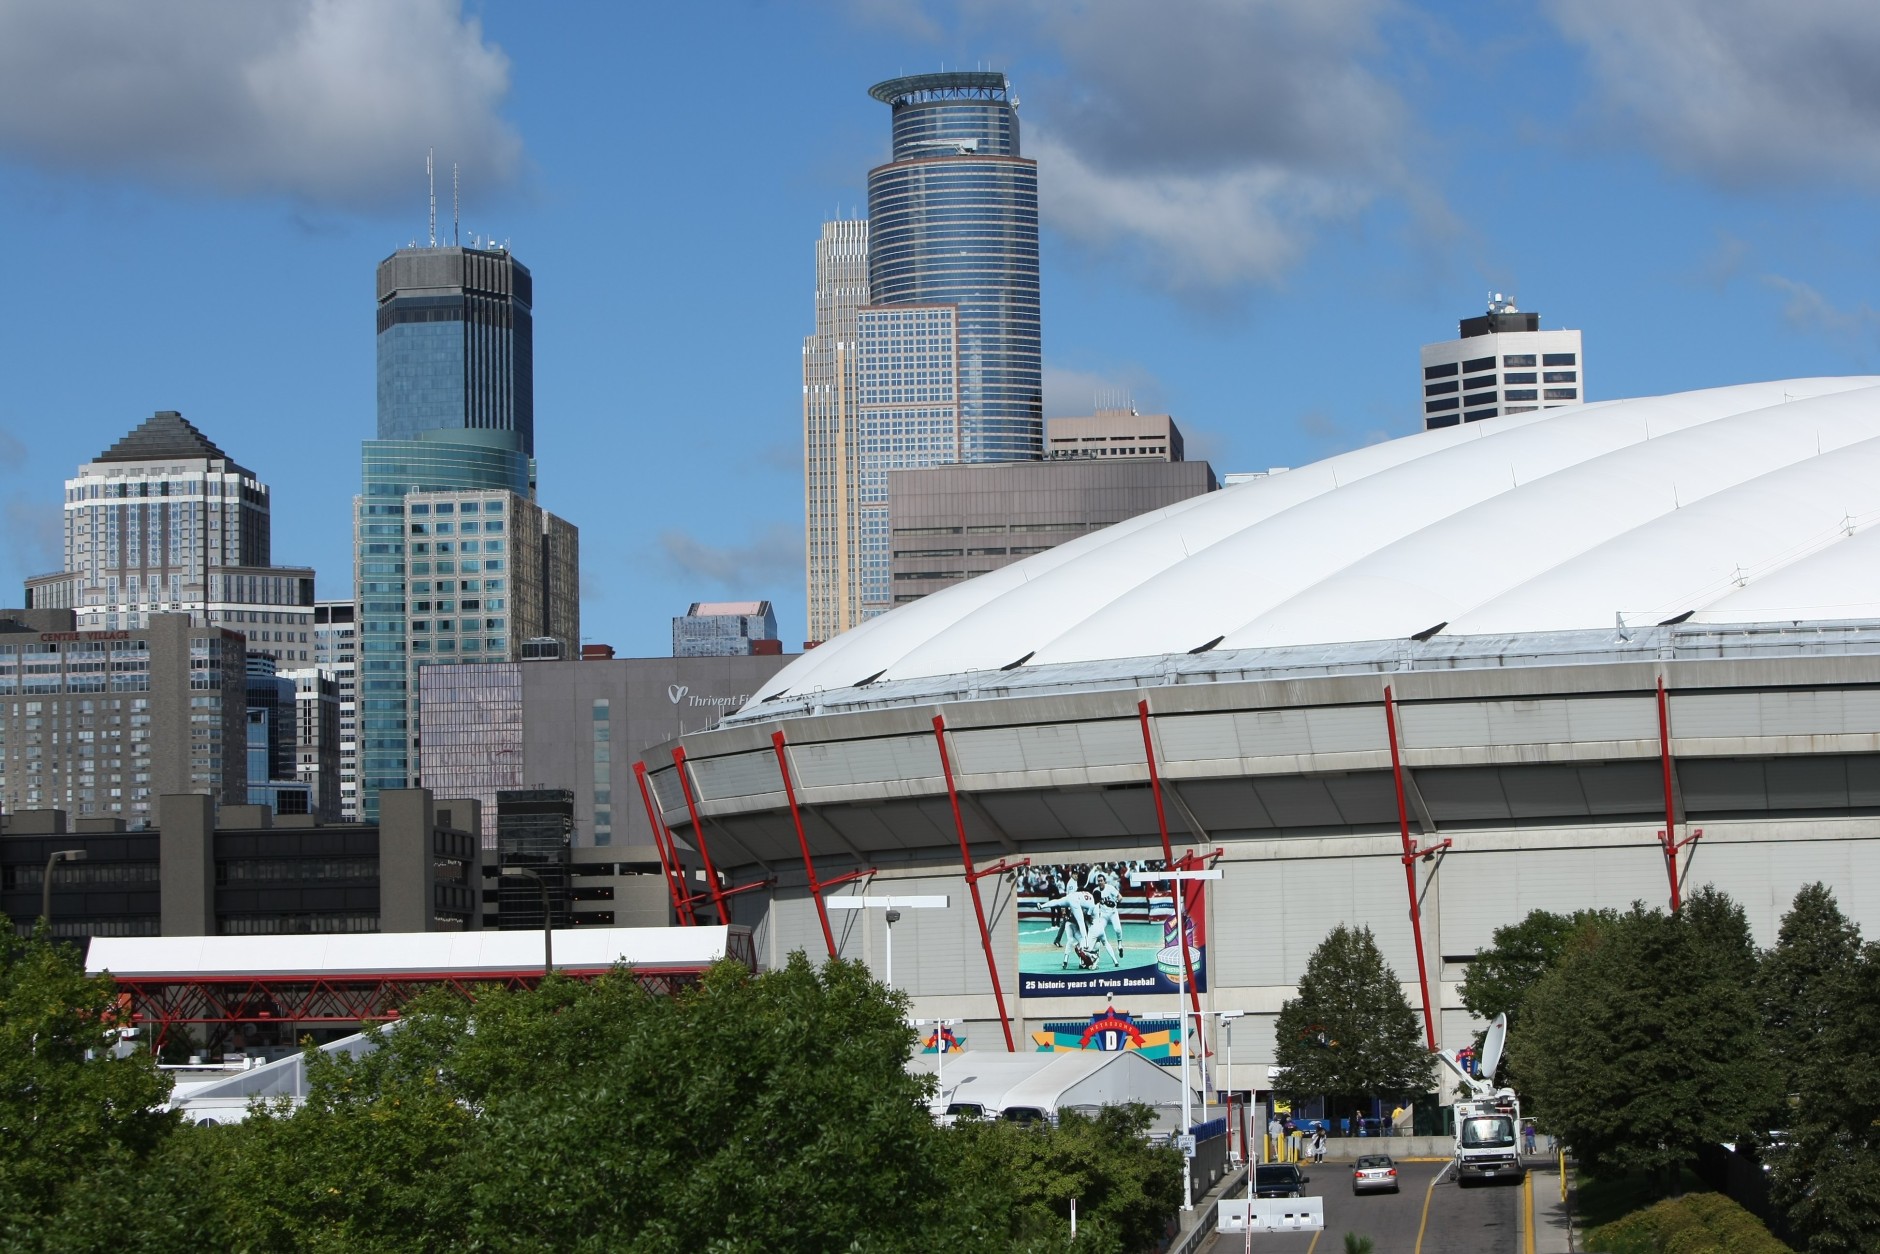 MINNEAPOLIS, MN - SEPTEMBER 09:  The Minneapolis city skyline is a backdrop to the stadium as the Minnesota Vikings defeated the Atlanta Falcons 24-3 at the Metrodome on September 9, 2007 in Minneapolis, Minnesota.  (Photo by Doug Pensinger/Getty Images)